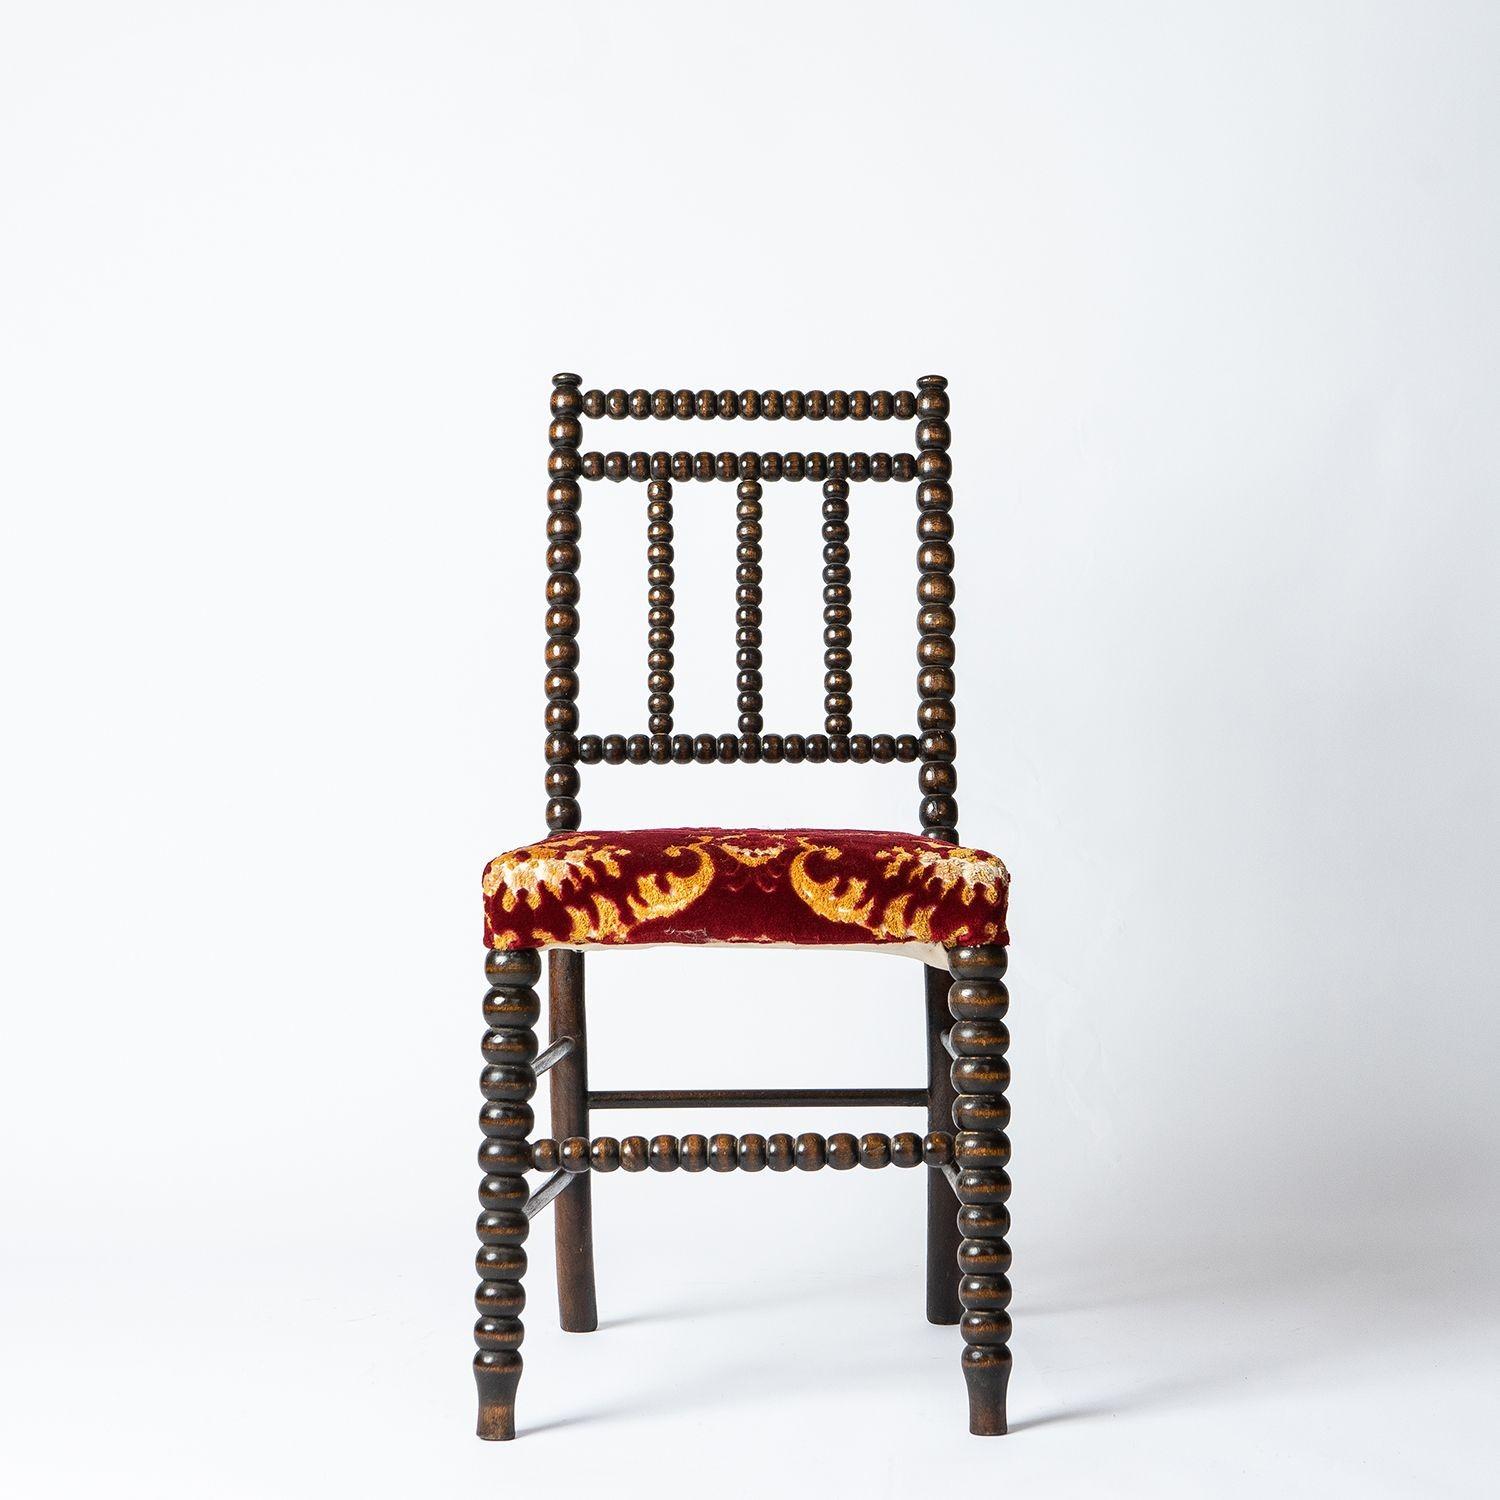 Upholstered occasional chair

An attractive chair of good proportions with bobbin-turned sections and rear sabre legs.
 
Sumptuous red and gold velvet brocade upholstery on the seat.
 
It is in very good vintage condition throughout, it is